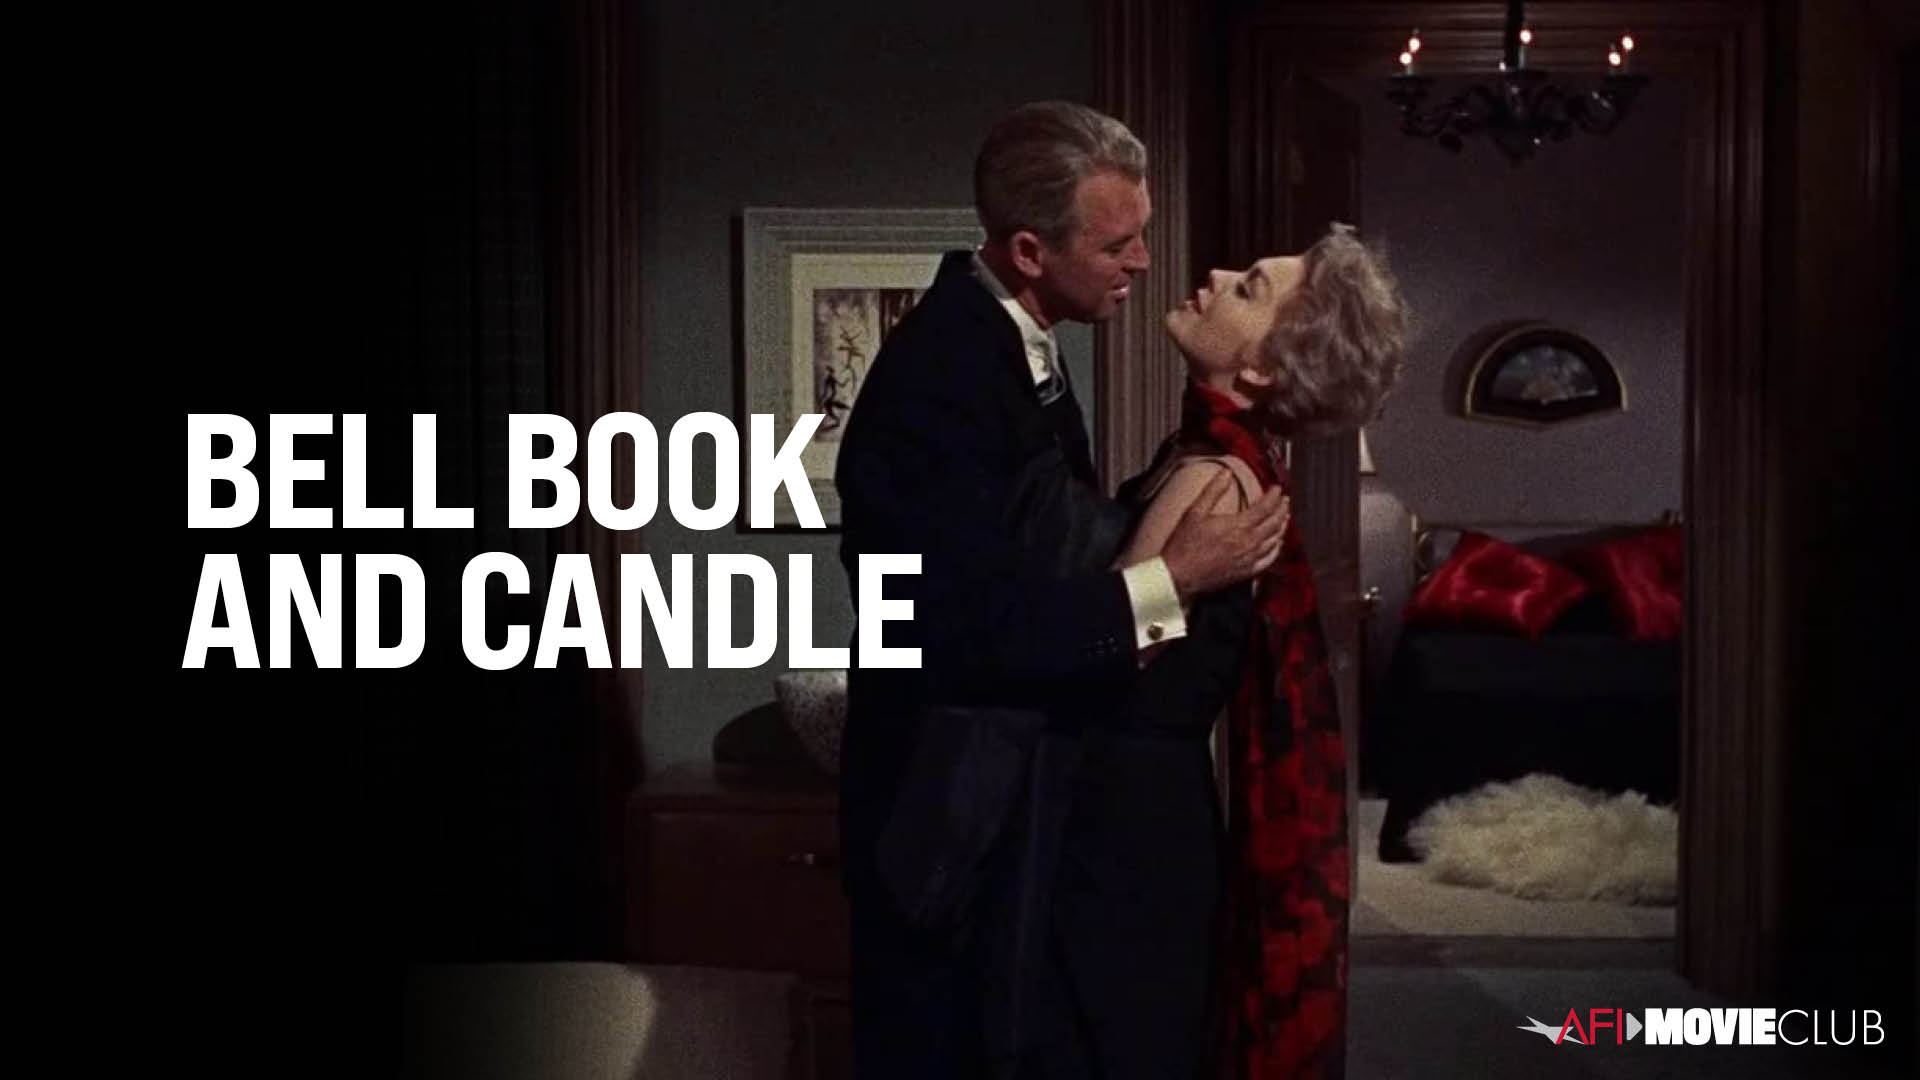 Bell Book and Candle Film Still - James Stewart and Kim Novak